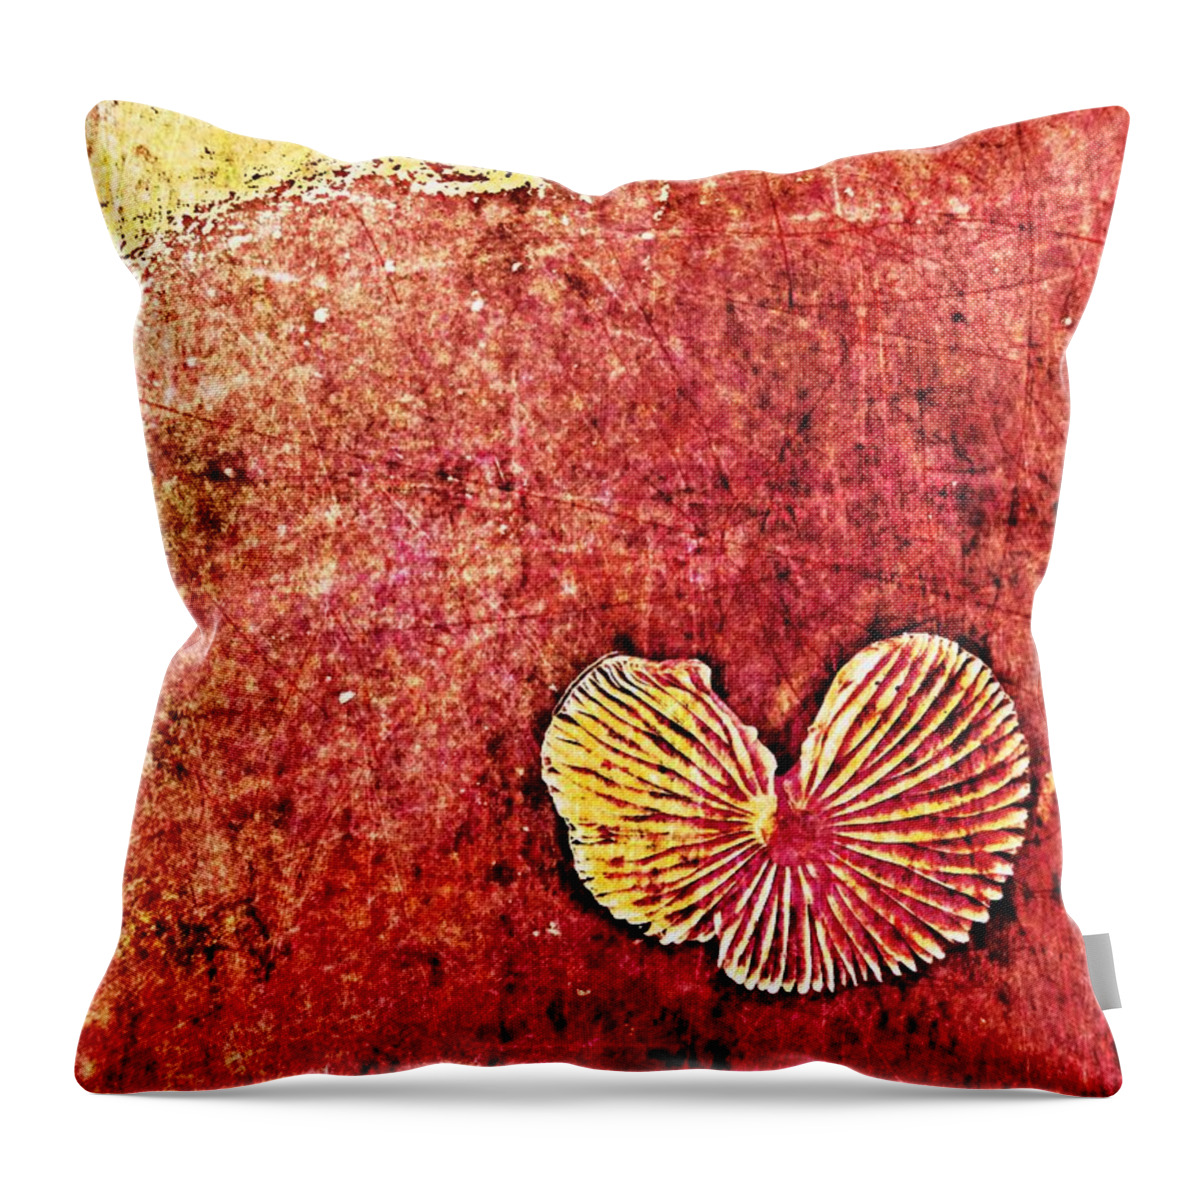 Texture Throw Pillow featuring the digital art Nature Abstract 4 by Maria Huntley